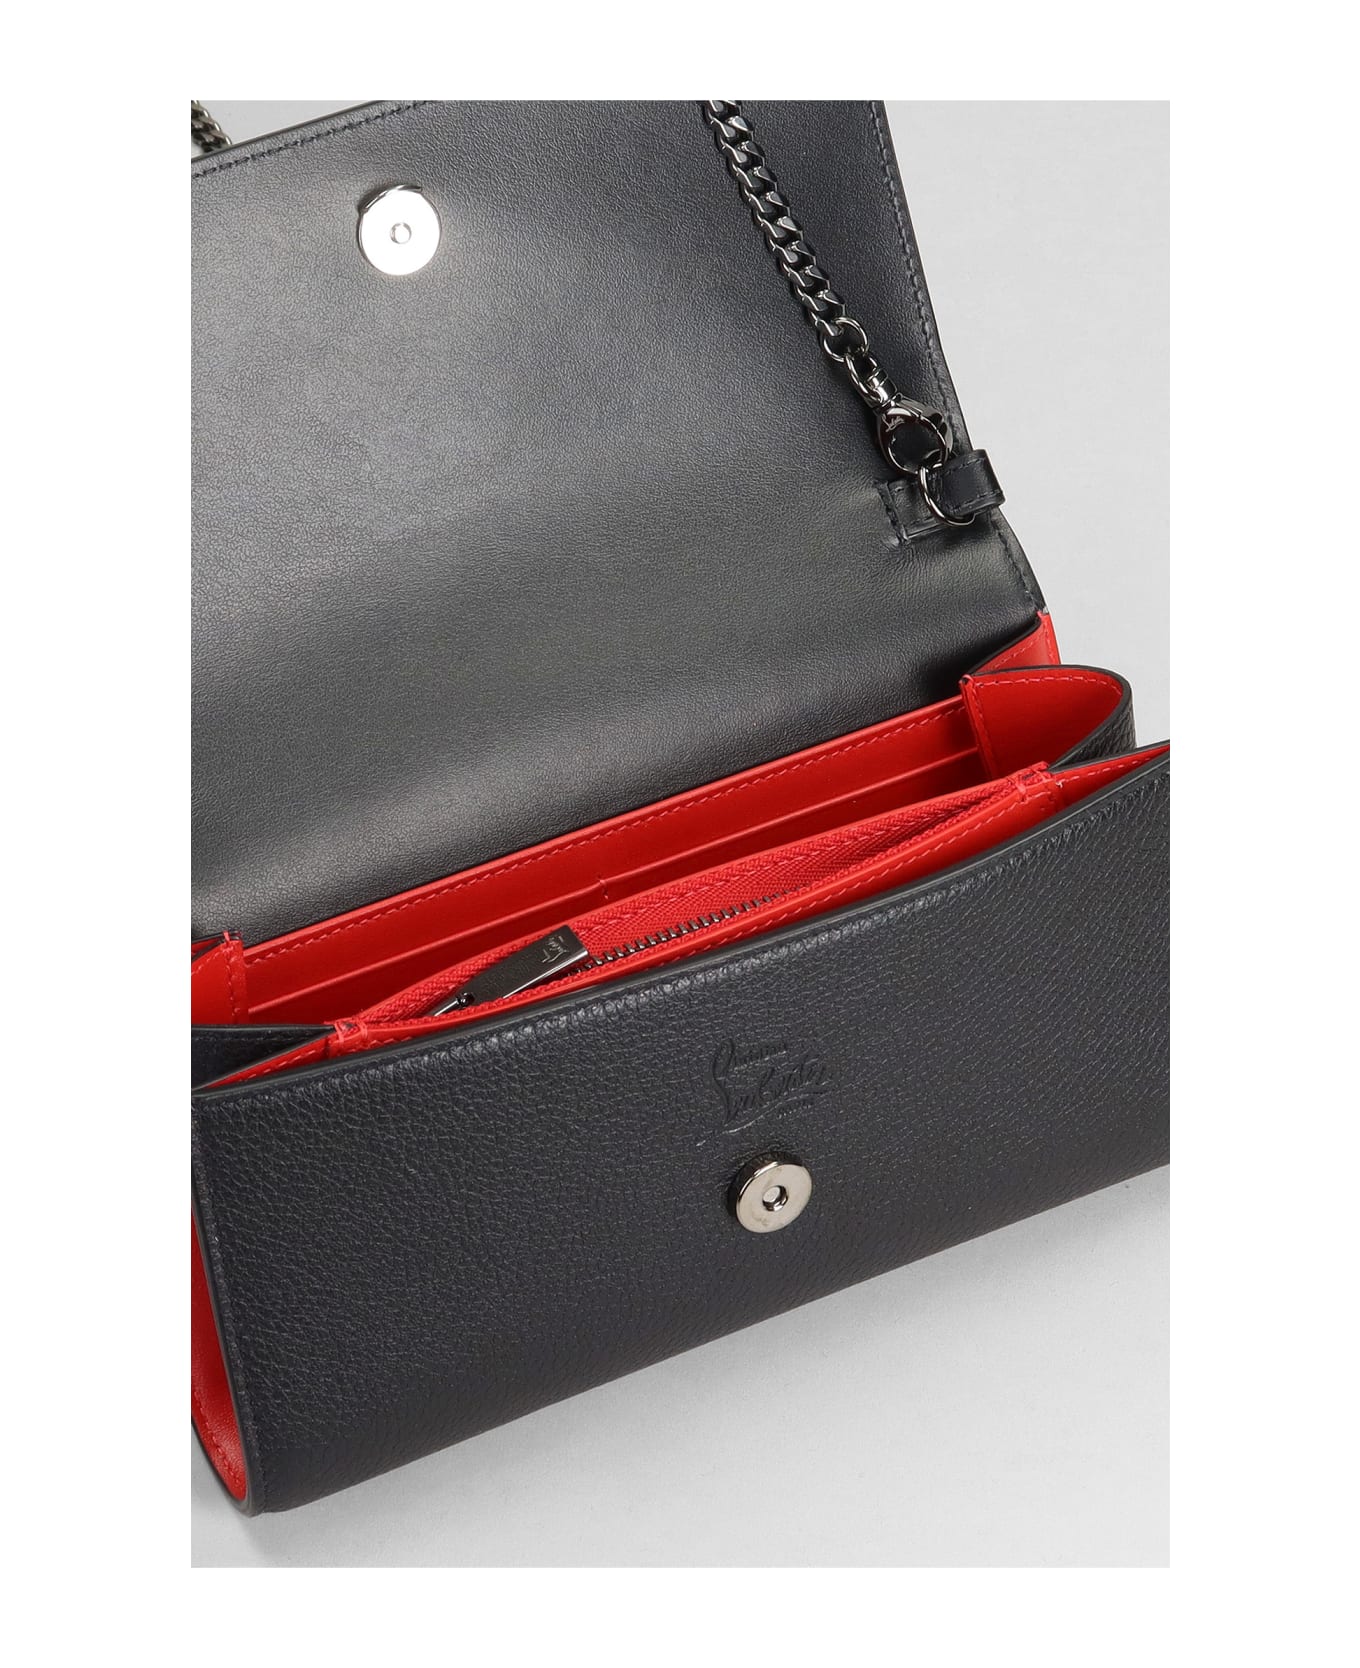 Christian Louboutin By My Side Chain Wallet In Grained Leather - Black/black 財布